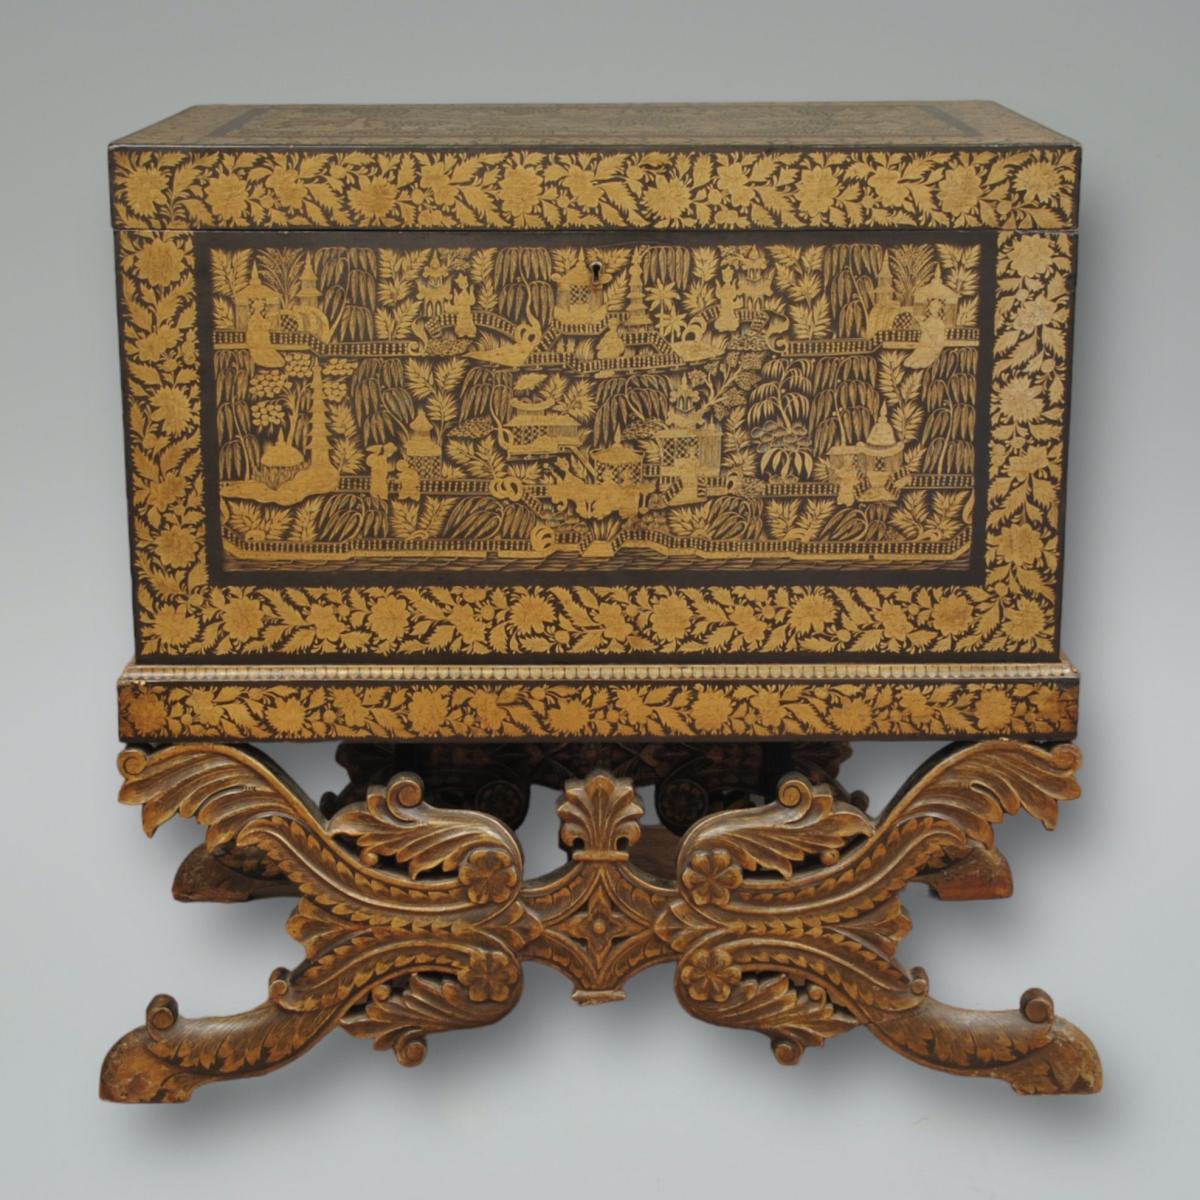 19th Century Anglo Indian Lacquer Trunk on Stand